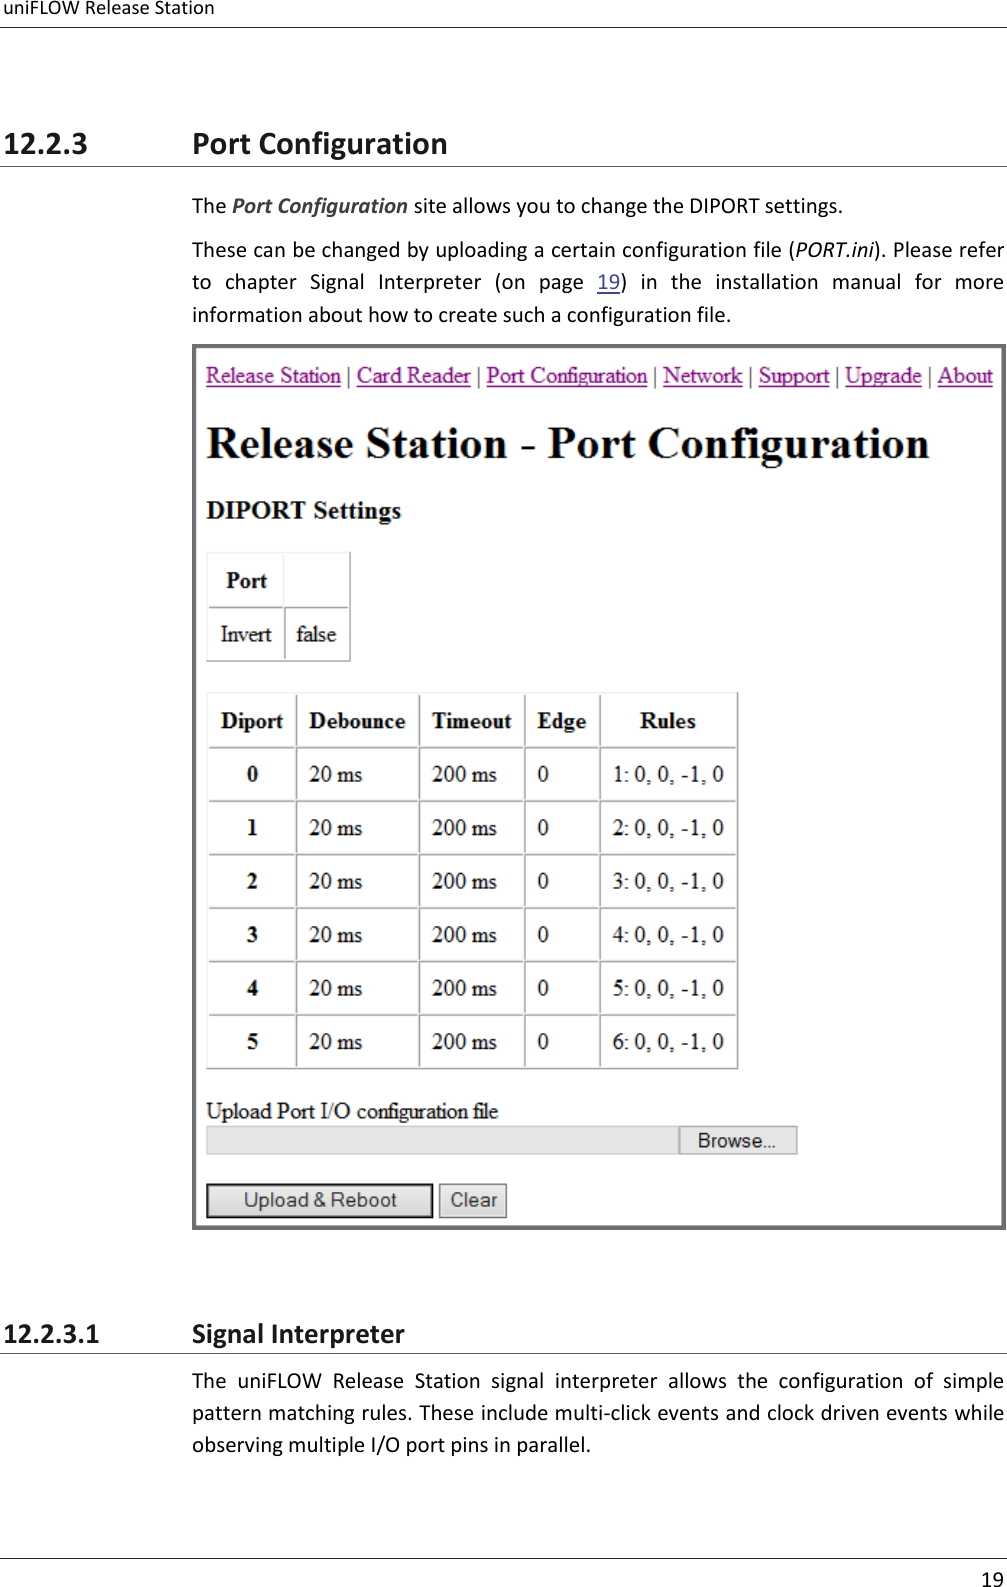 uniFLOW Release Station     19   12.2.3 Port Configuration The Port Configuration site allows you to change the DIPORT settings. These can be changed by uploading a certain configuration file (PORT.ini). Please refer to  chapter  Signal  Interpreter  (on  page  19)  in  the  installation  manual  for  more information about how to create such a configuration file.   12.2.3.1 Signal Interpreter The  uniFLOW  Release  Station  signal  interpreter  allows  the  configuration  of  simple pattern matching rules. These include multi-click events and clock driven events while observing multiple I/O port pins in parallel. 